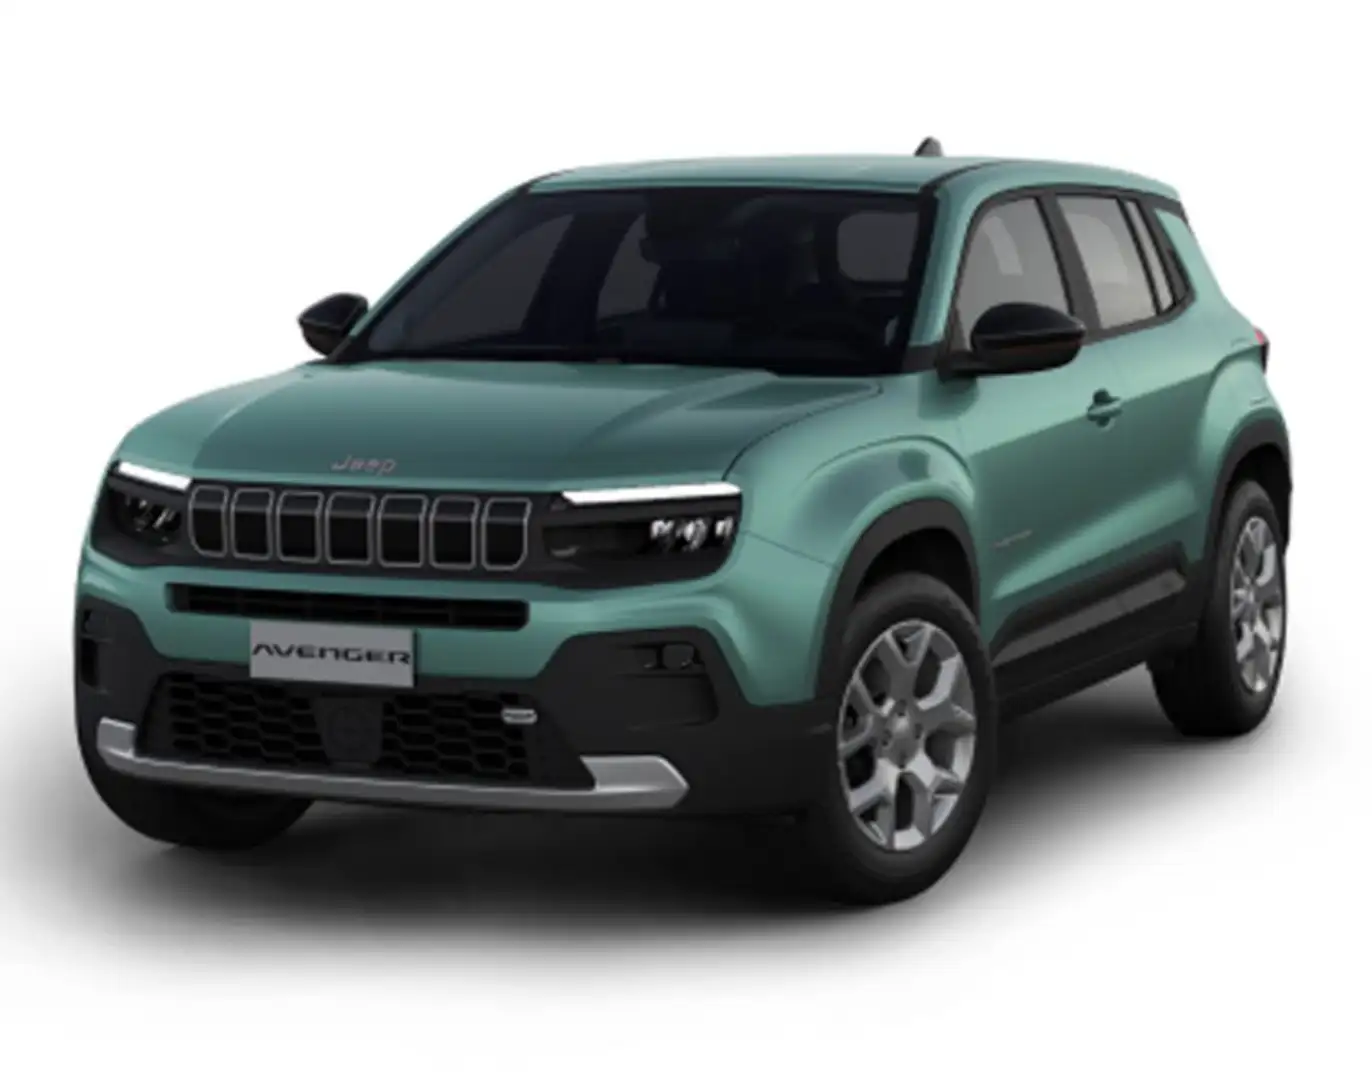 Jeep Avenger 1.2 Turbo Altitude+Infotainment+Whinter+ADAS Pack Verde - 1